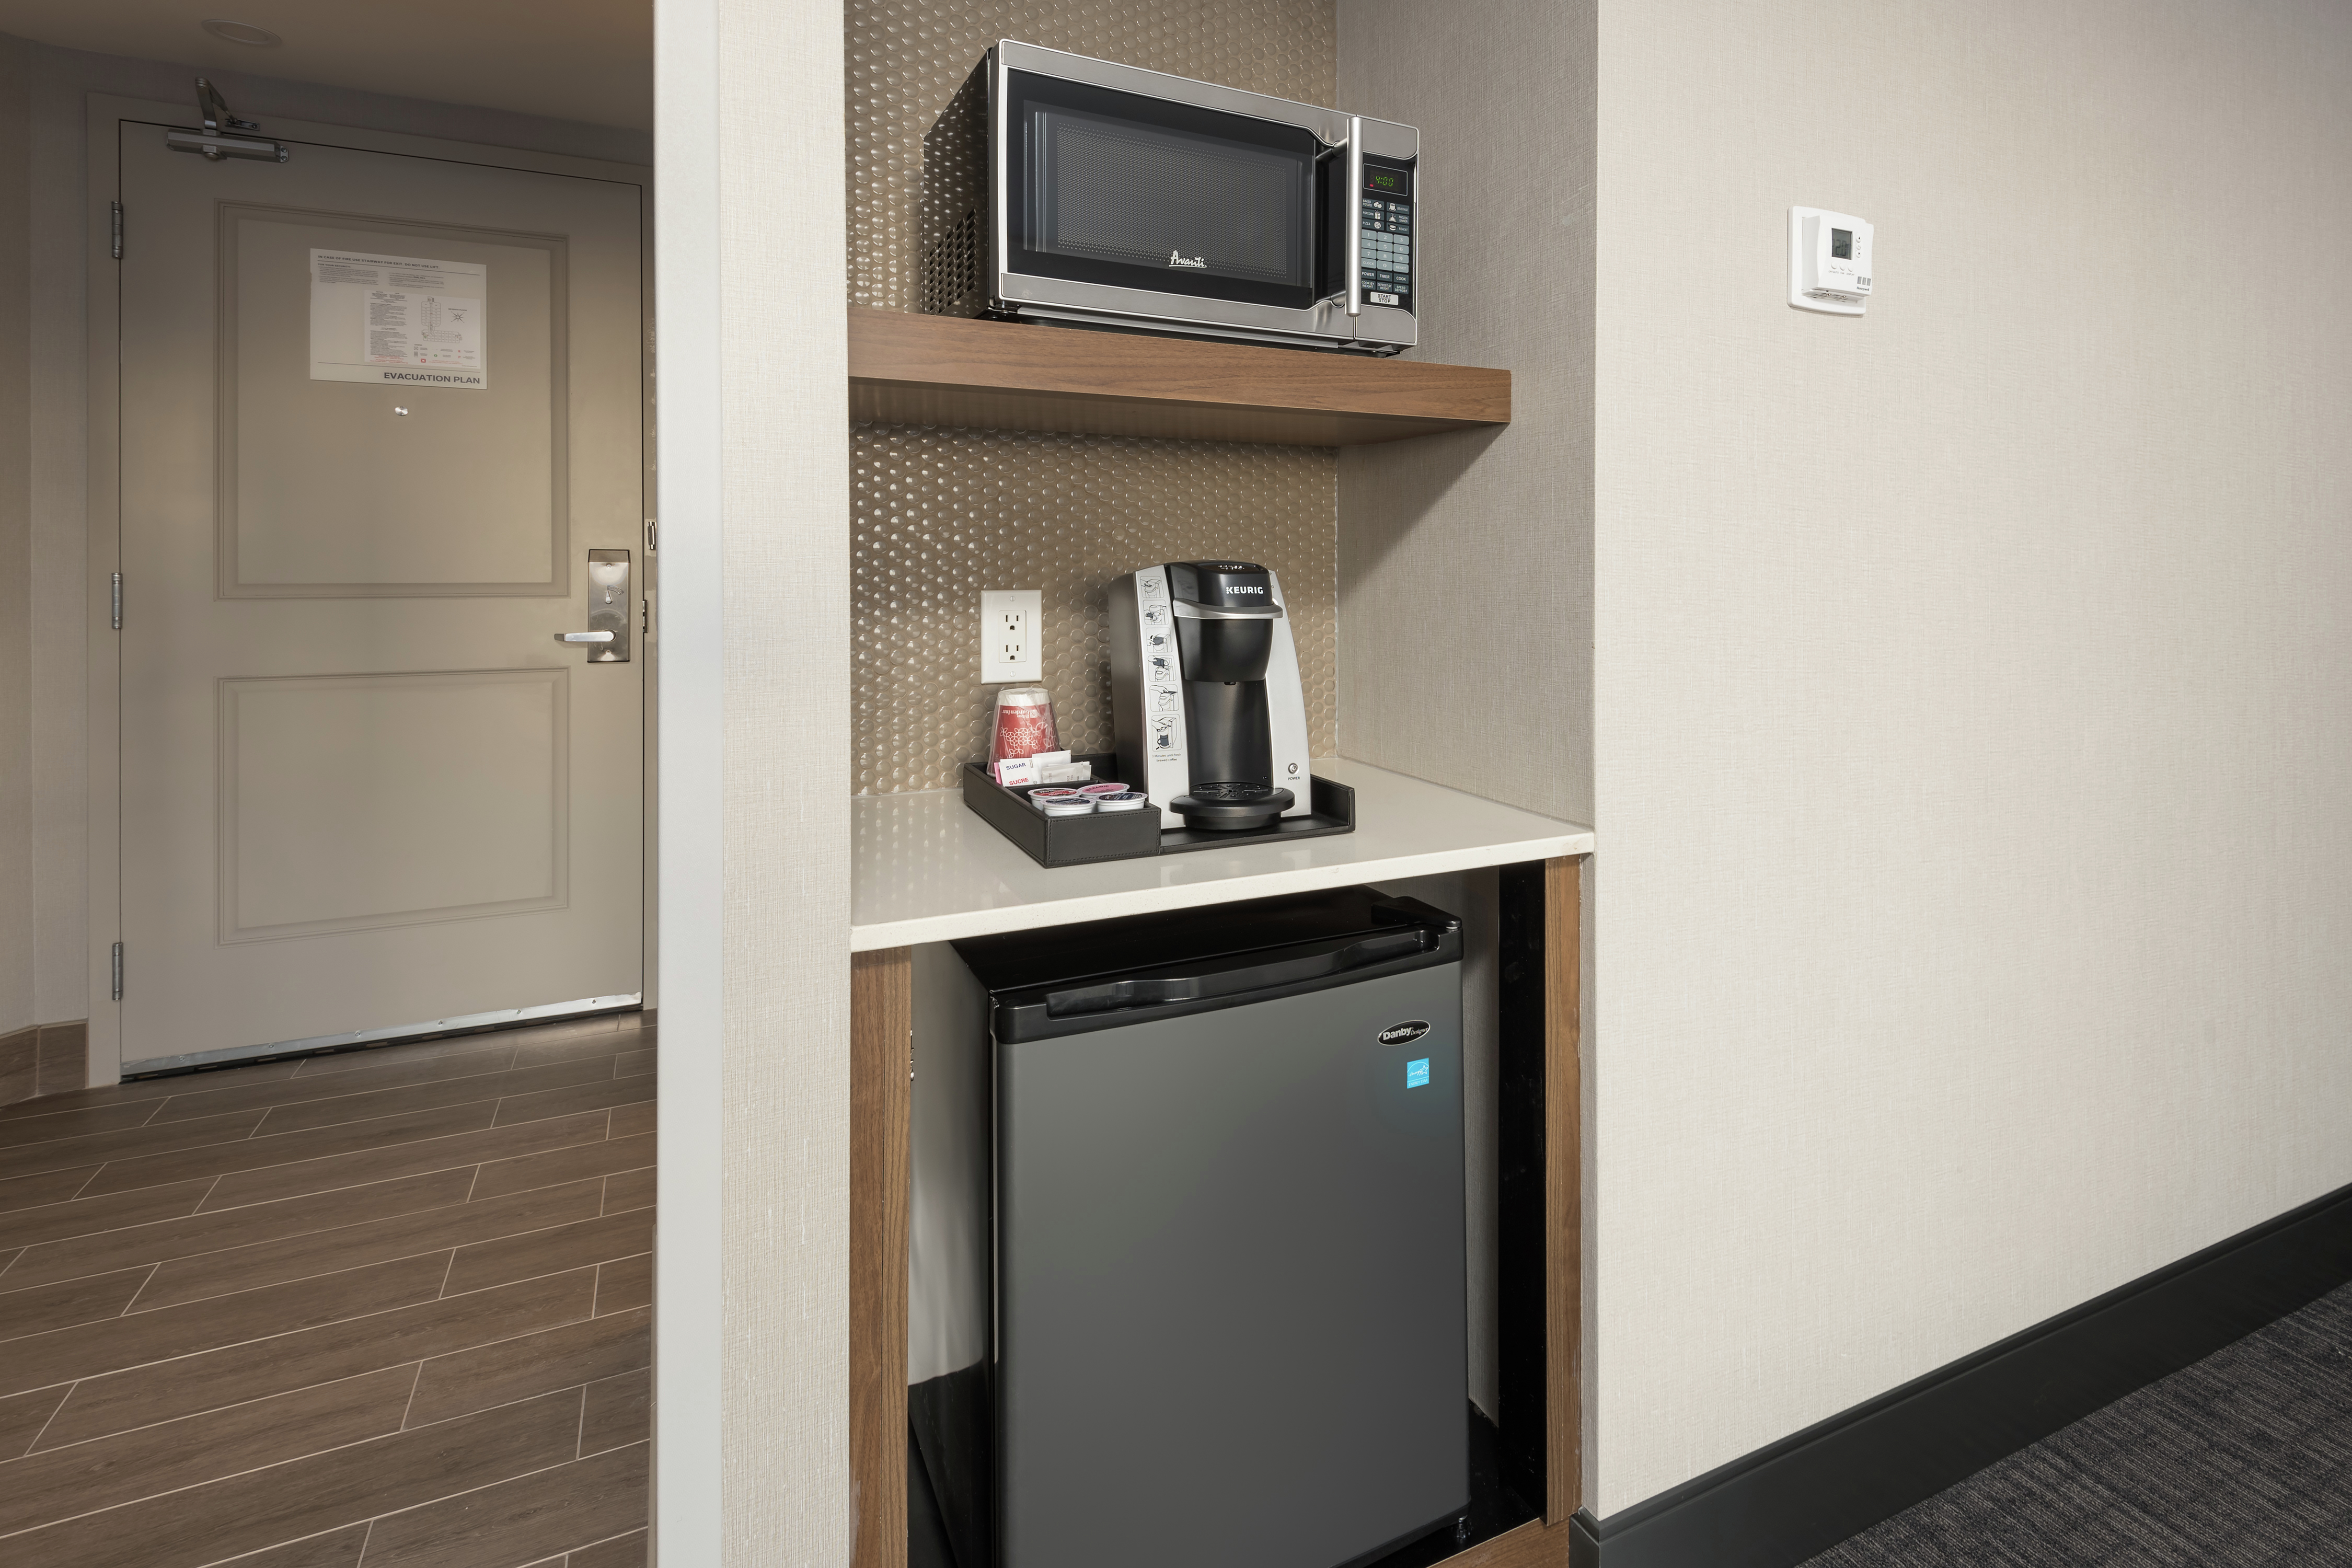 Cabinet Open showing Fridge Microwave and Coffeemaker